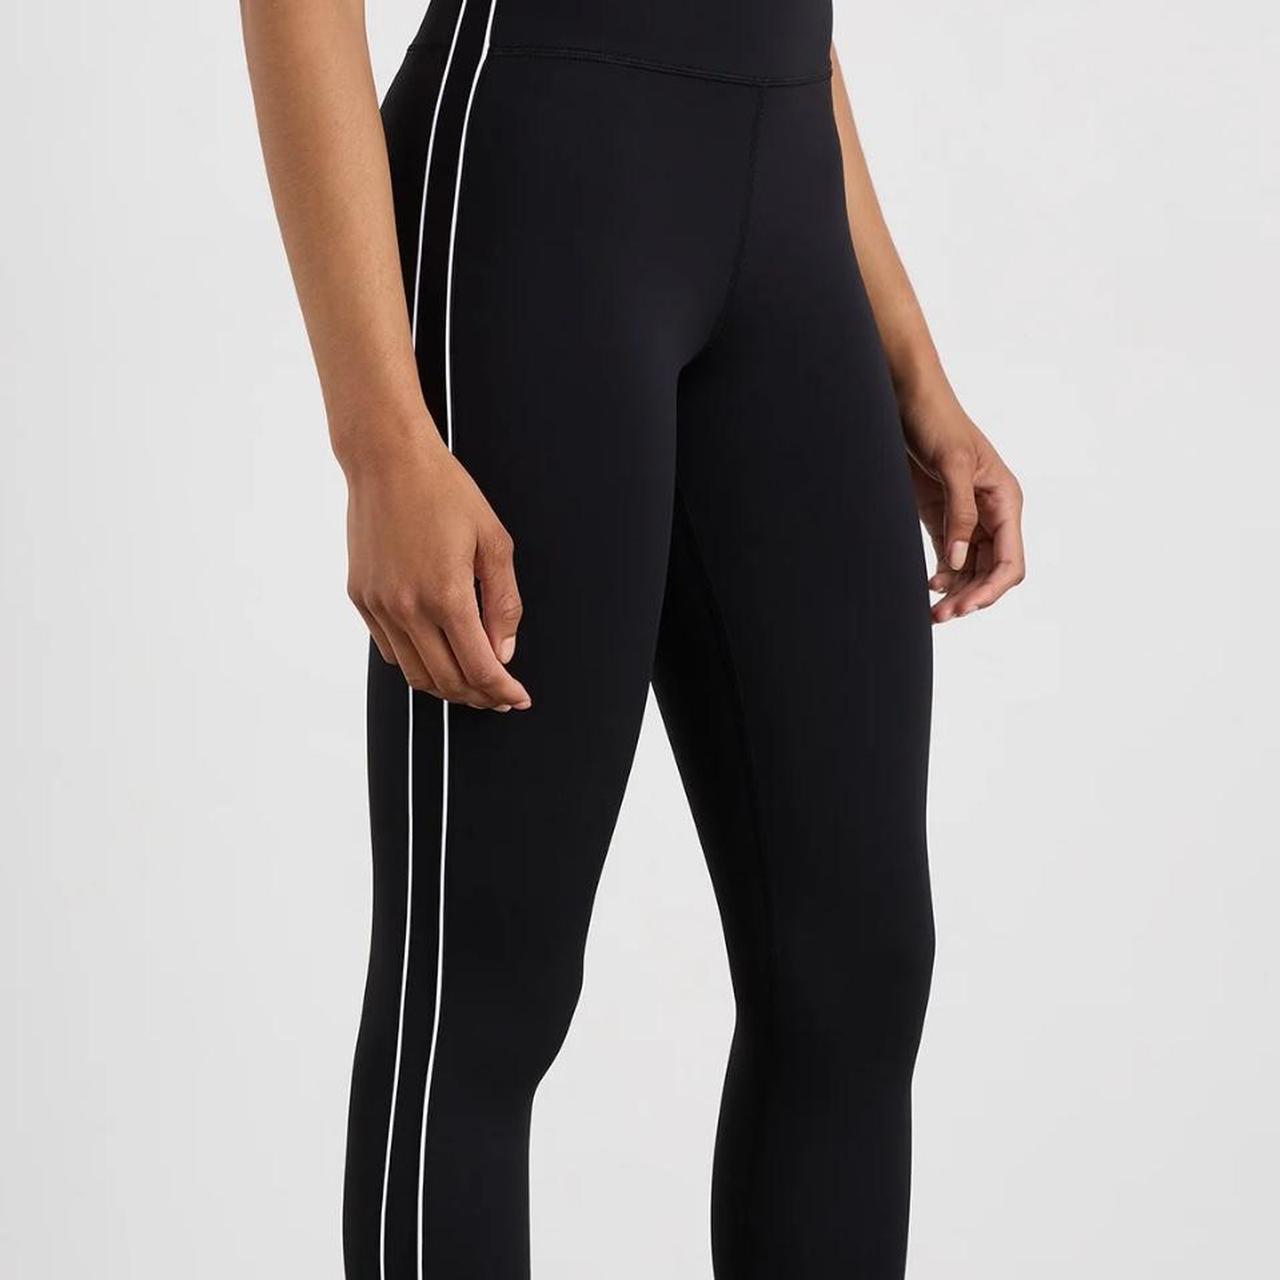 Piped Side Ankle Length Legging 299